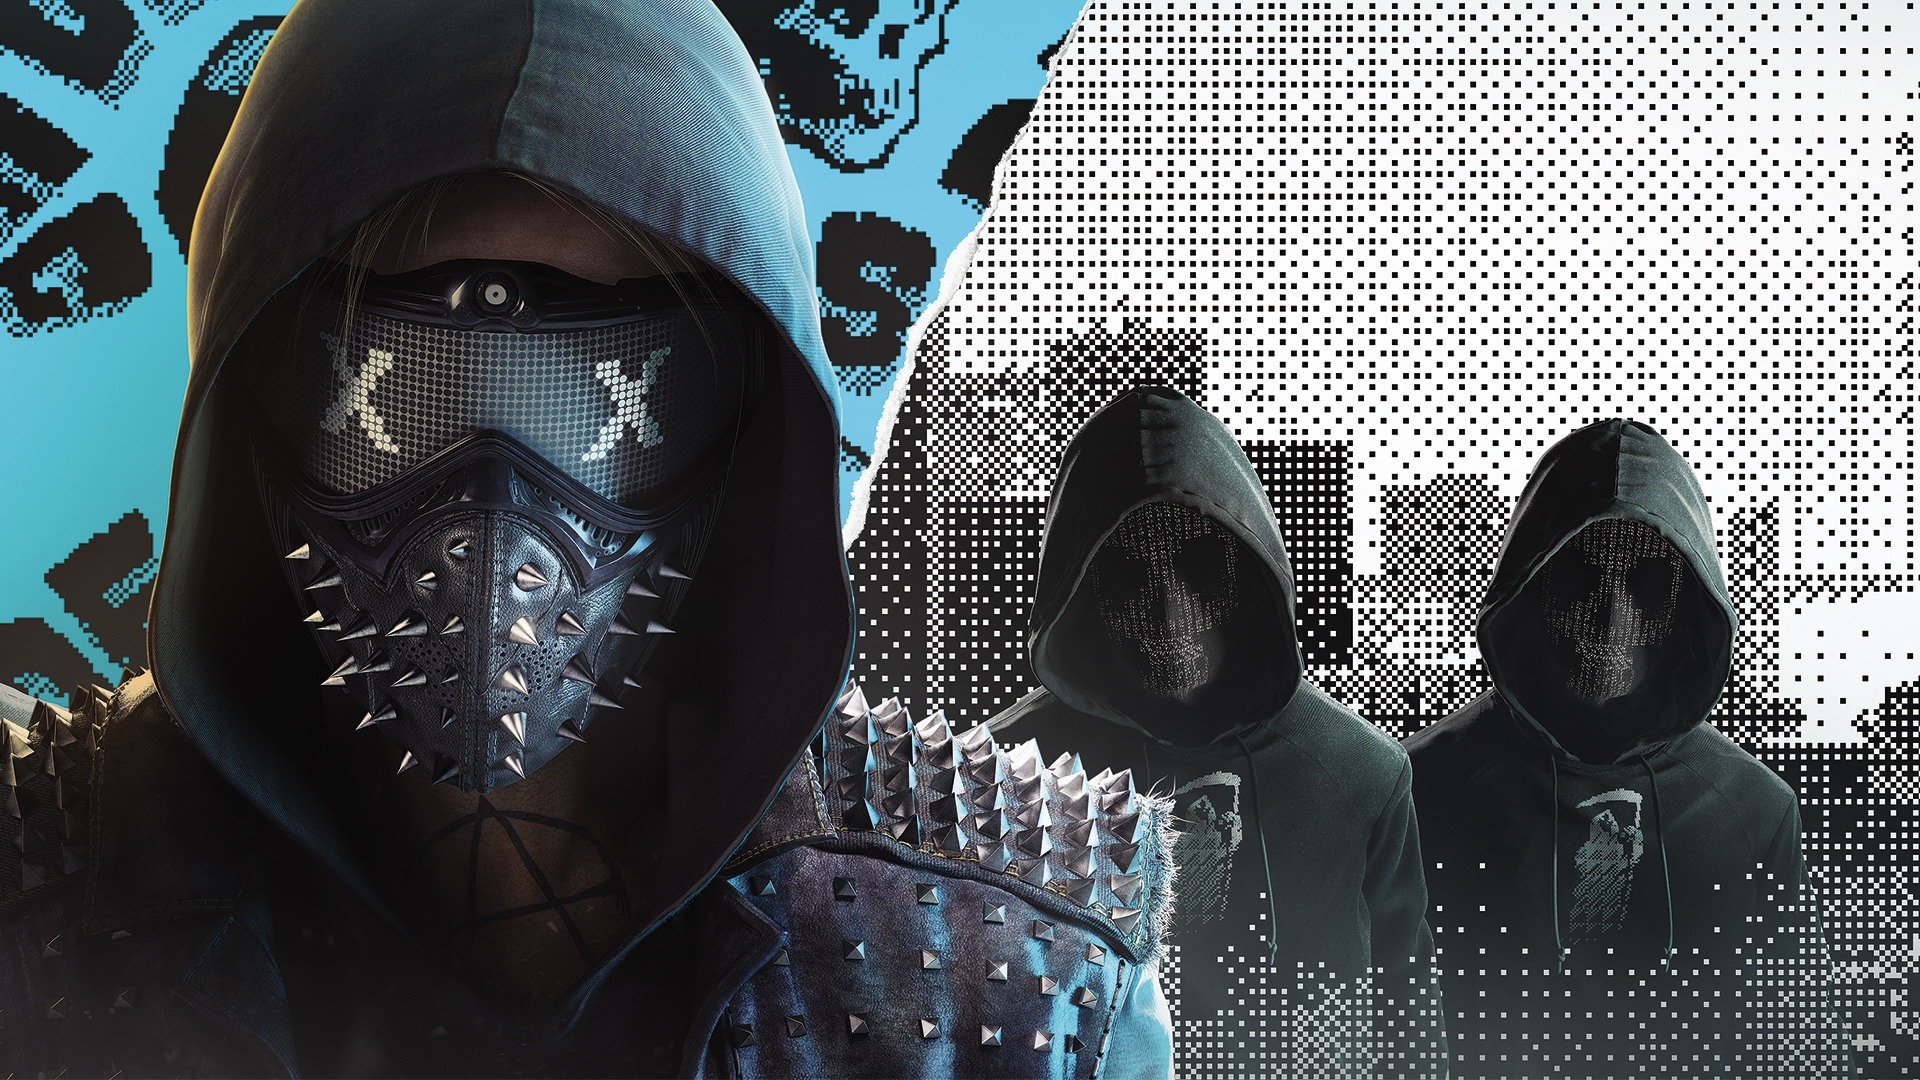 Free Download Watch Dogs 2 Wallpaper Id366086 Full Hd 1080p For